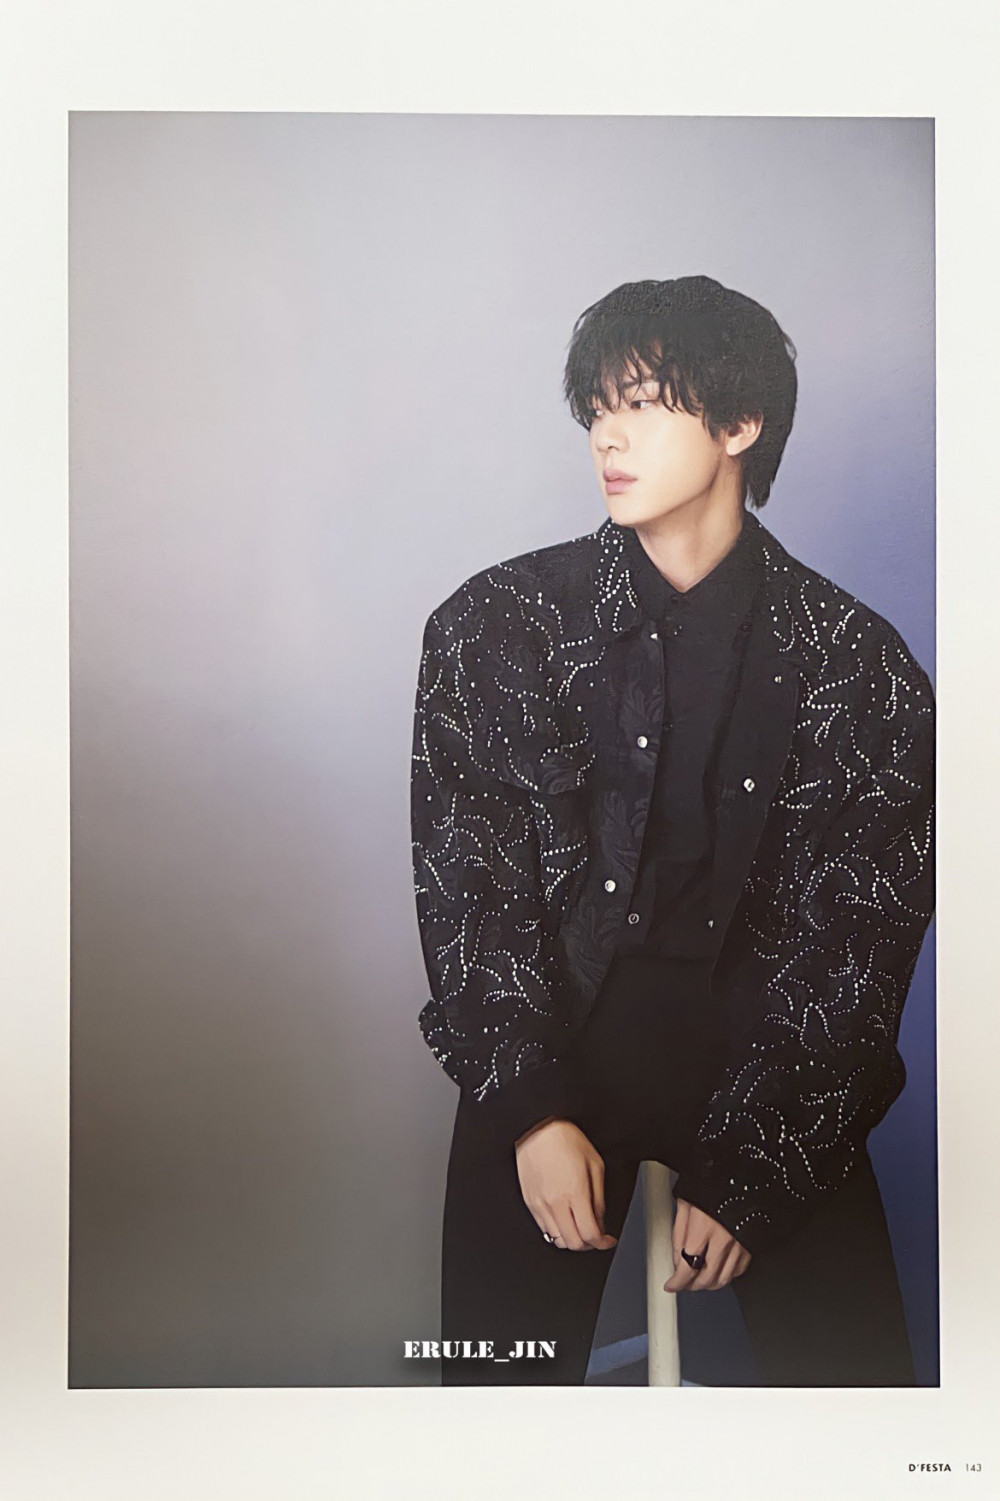 Jin's 'D'festa Dicon Photobook' is the first to be sold out among 